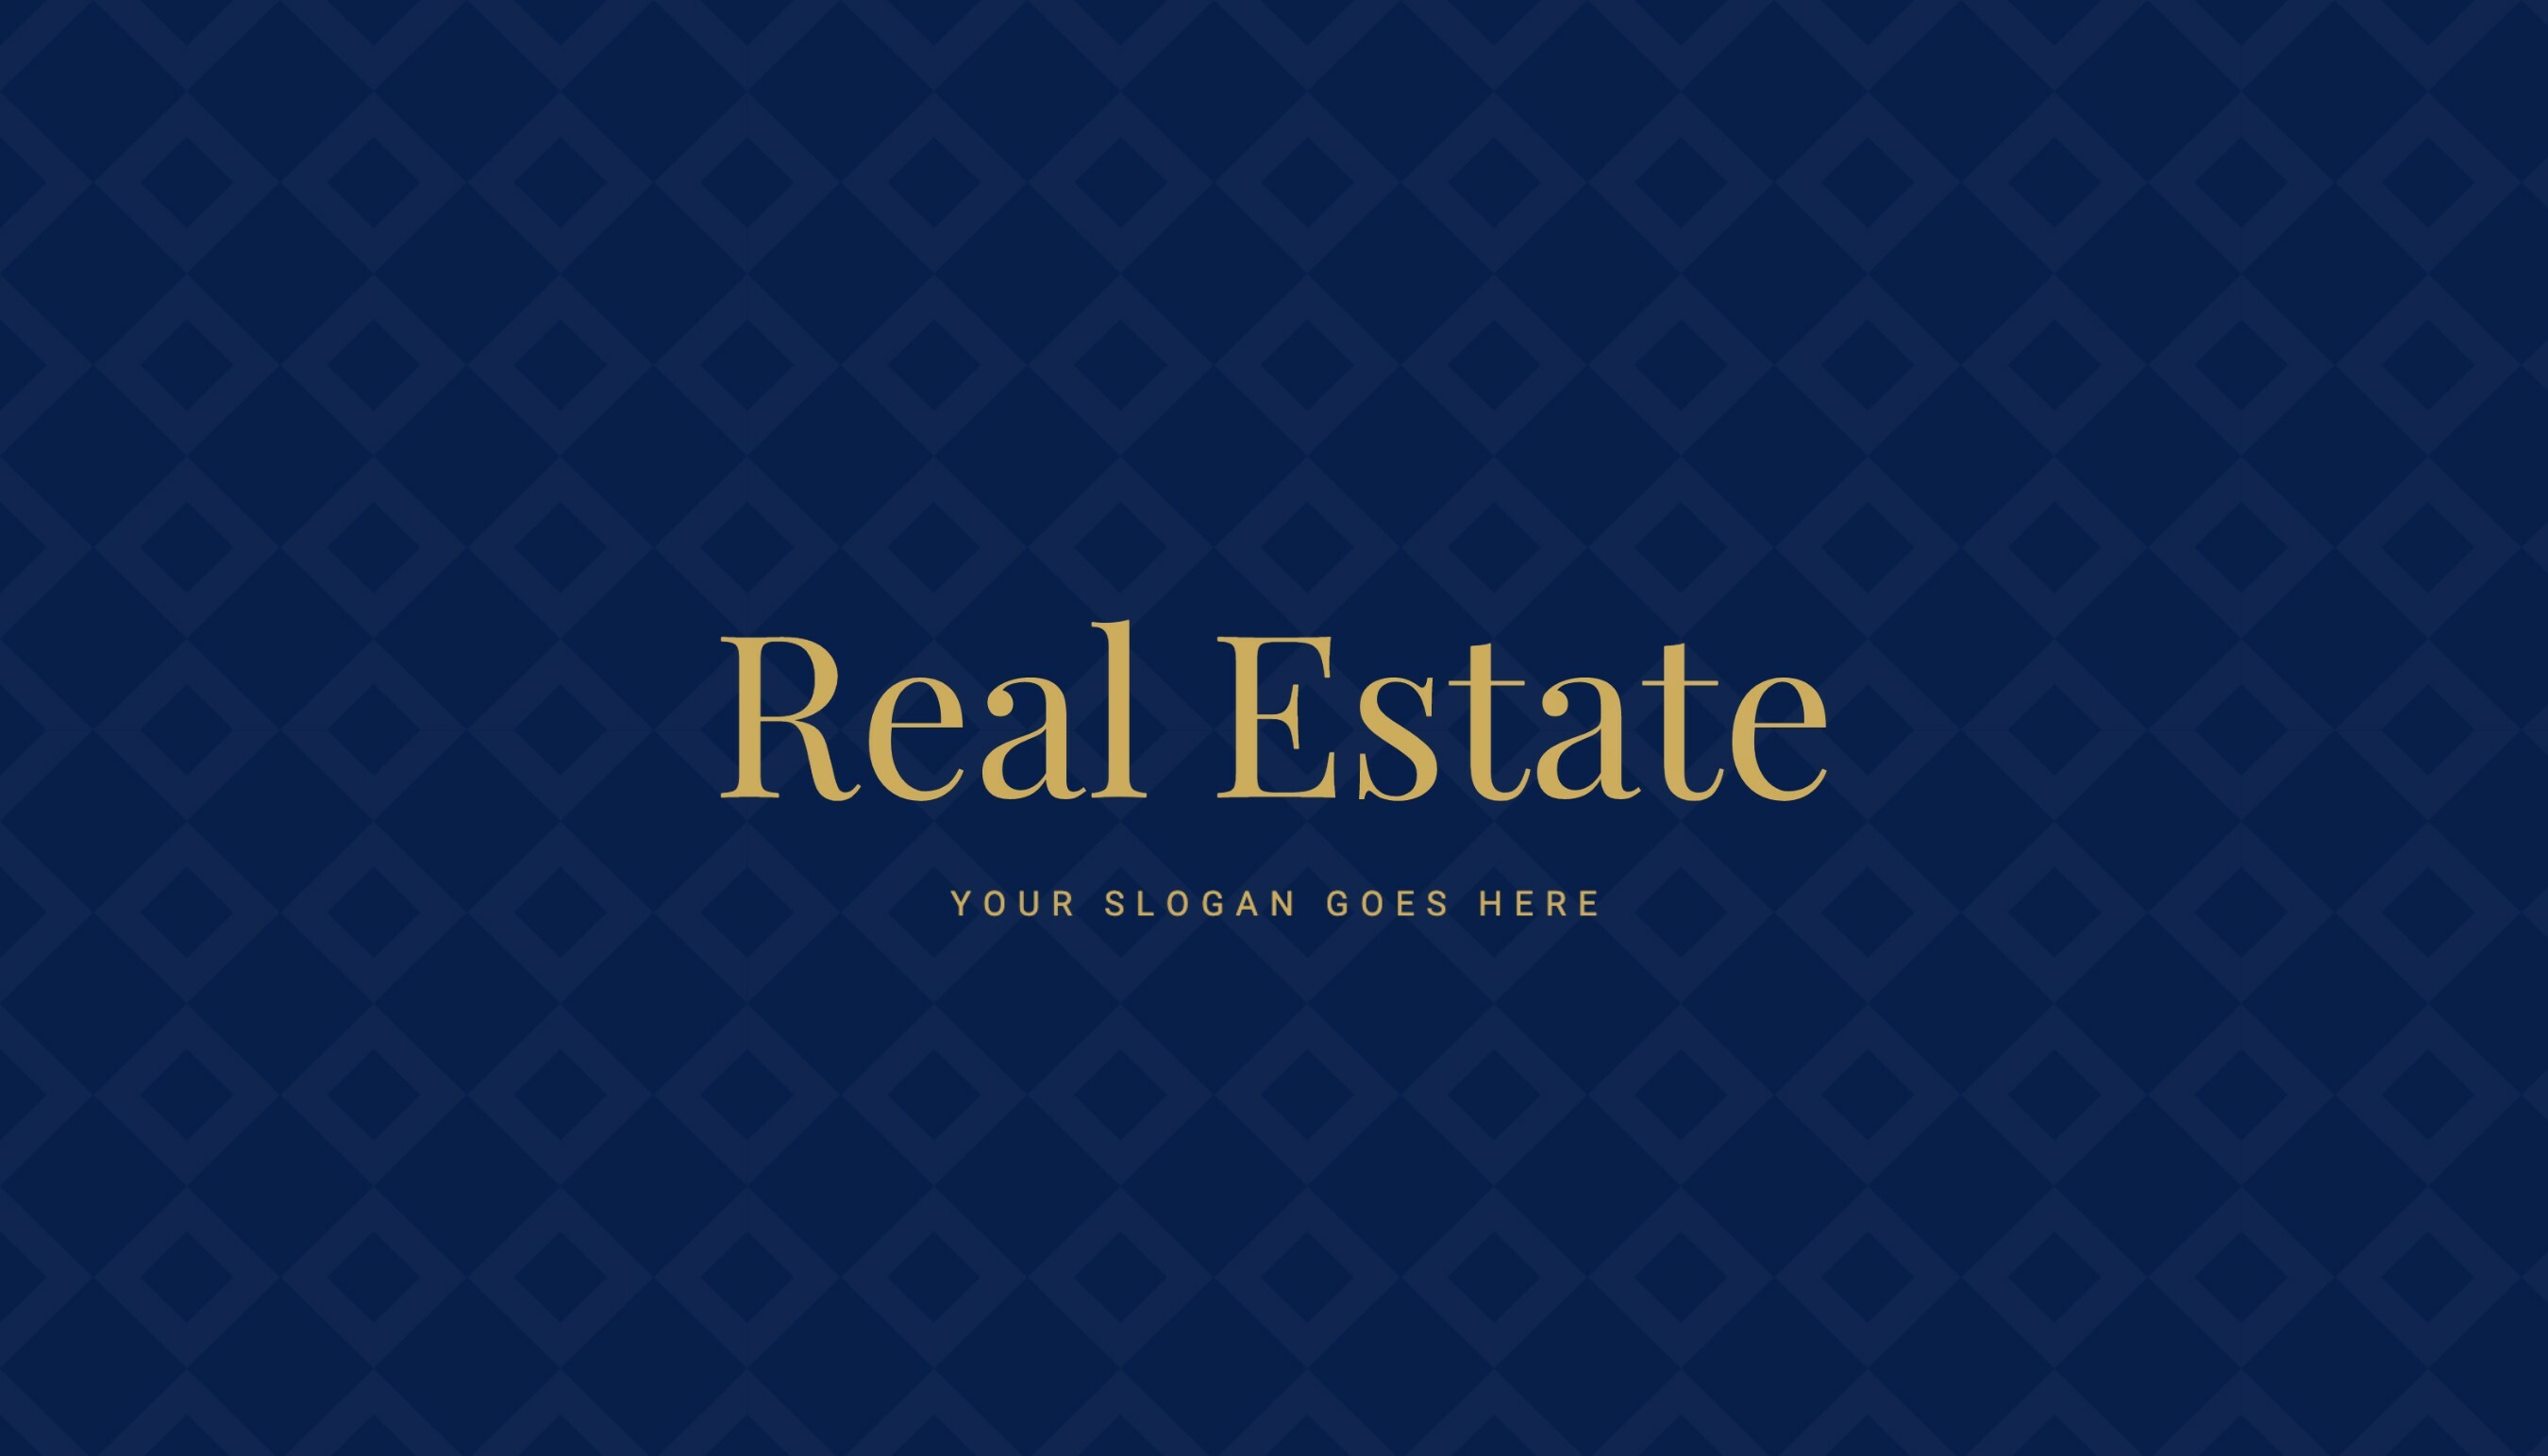 Luxury Business Card - Real Estate template